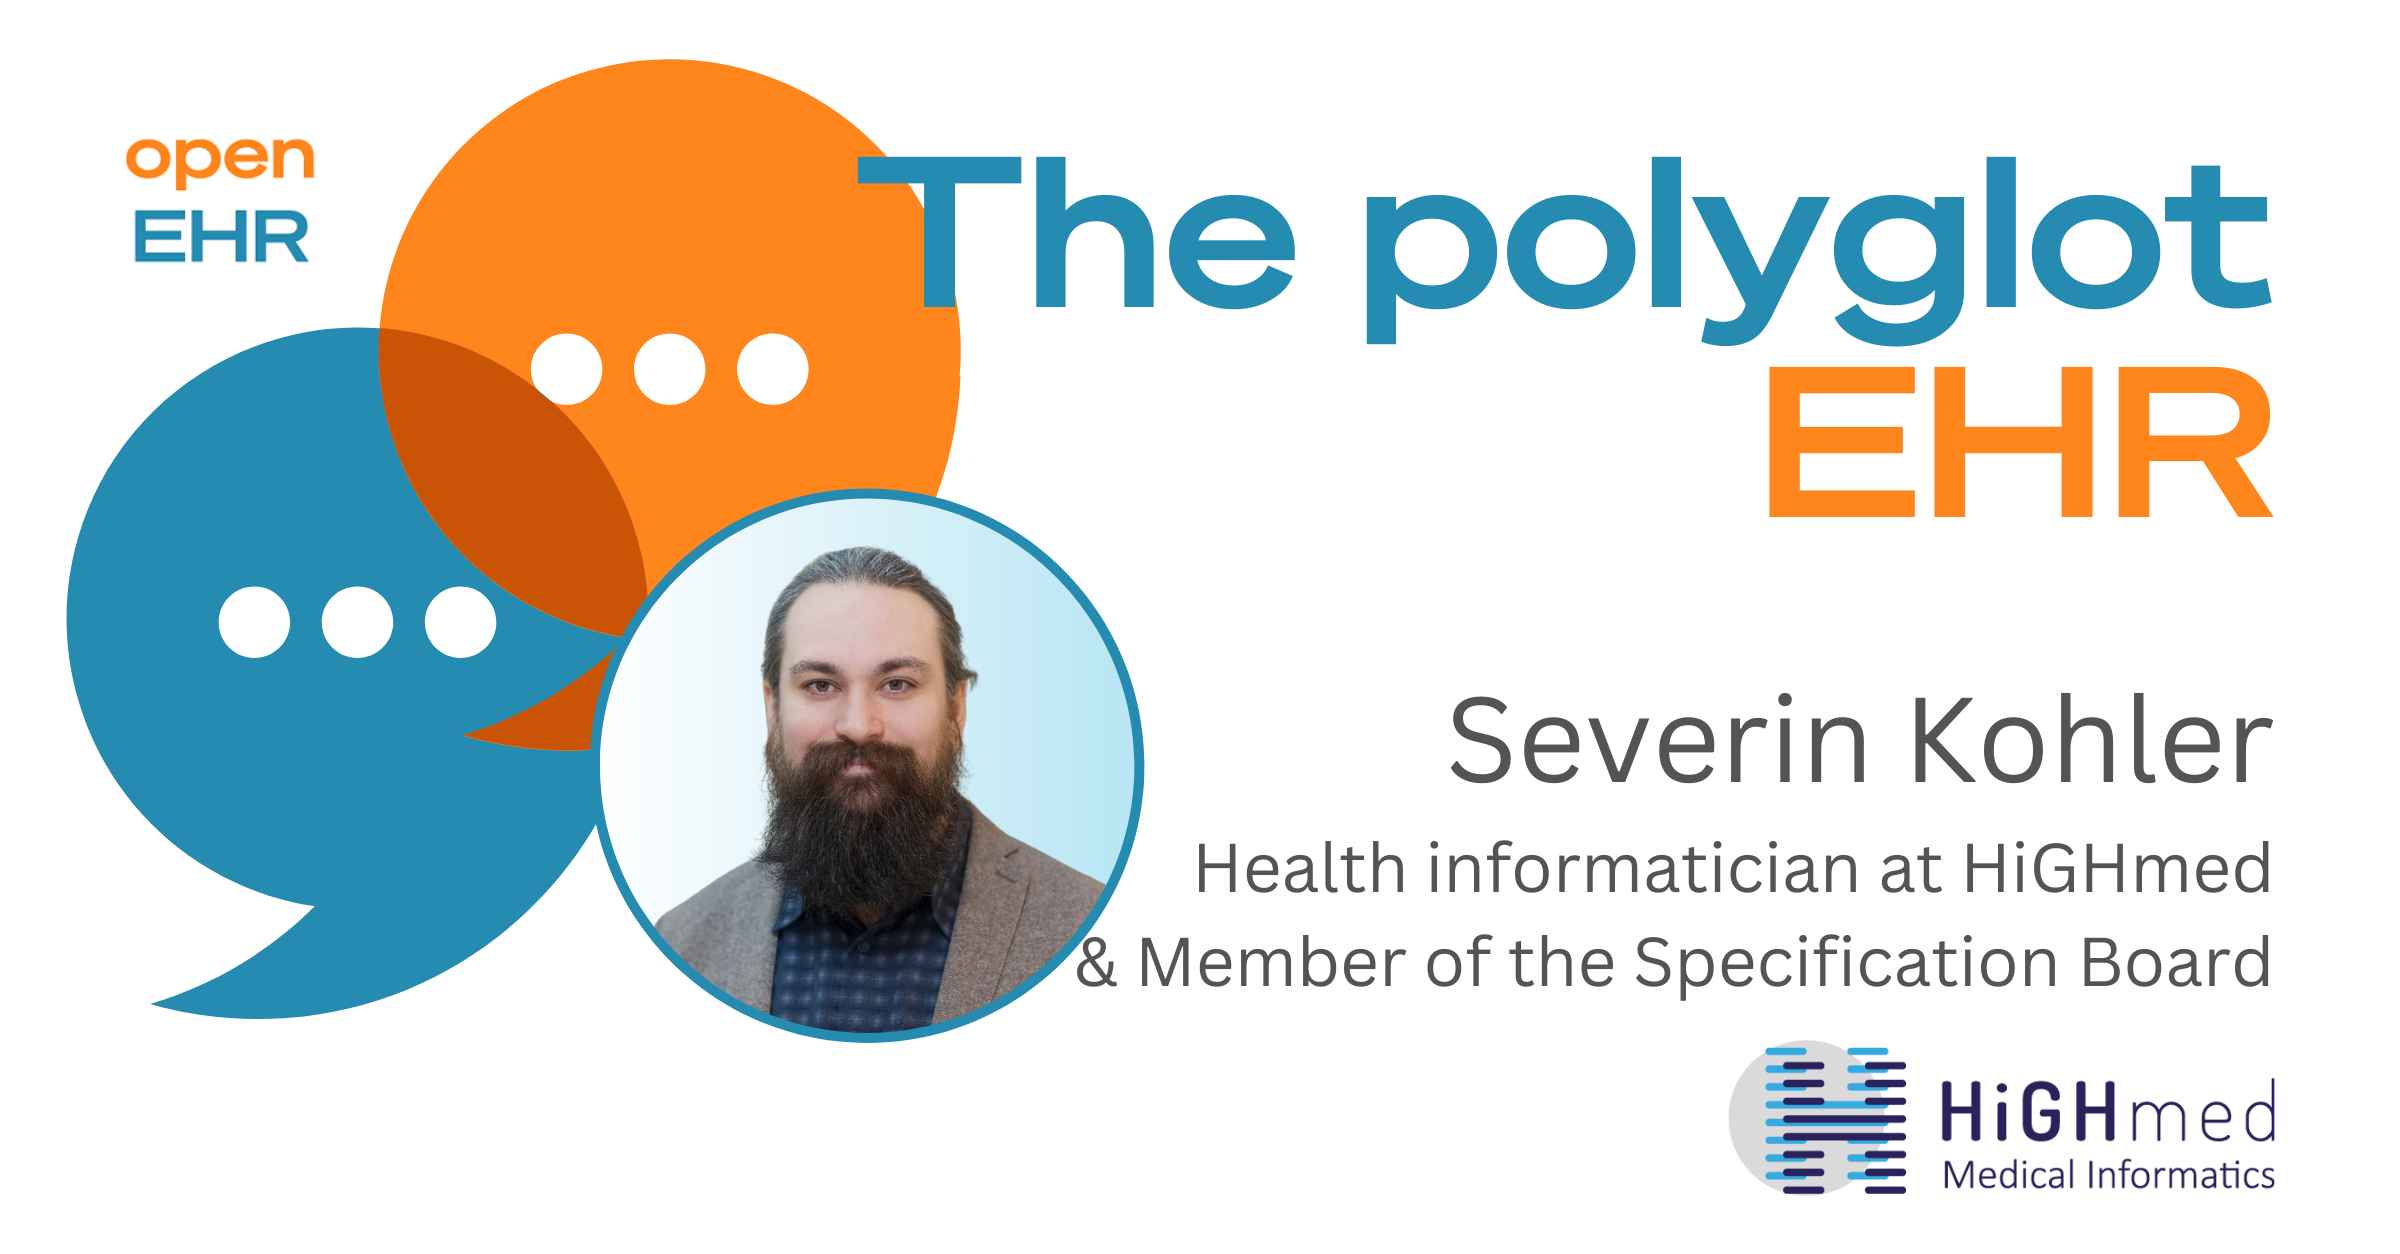 Severin Kohler, health informatician for HiGHmed, shares his insights on openEHR and its pivotal role in medical informatics standards.